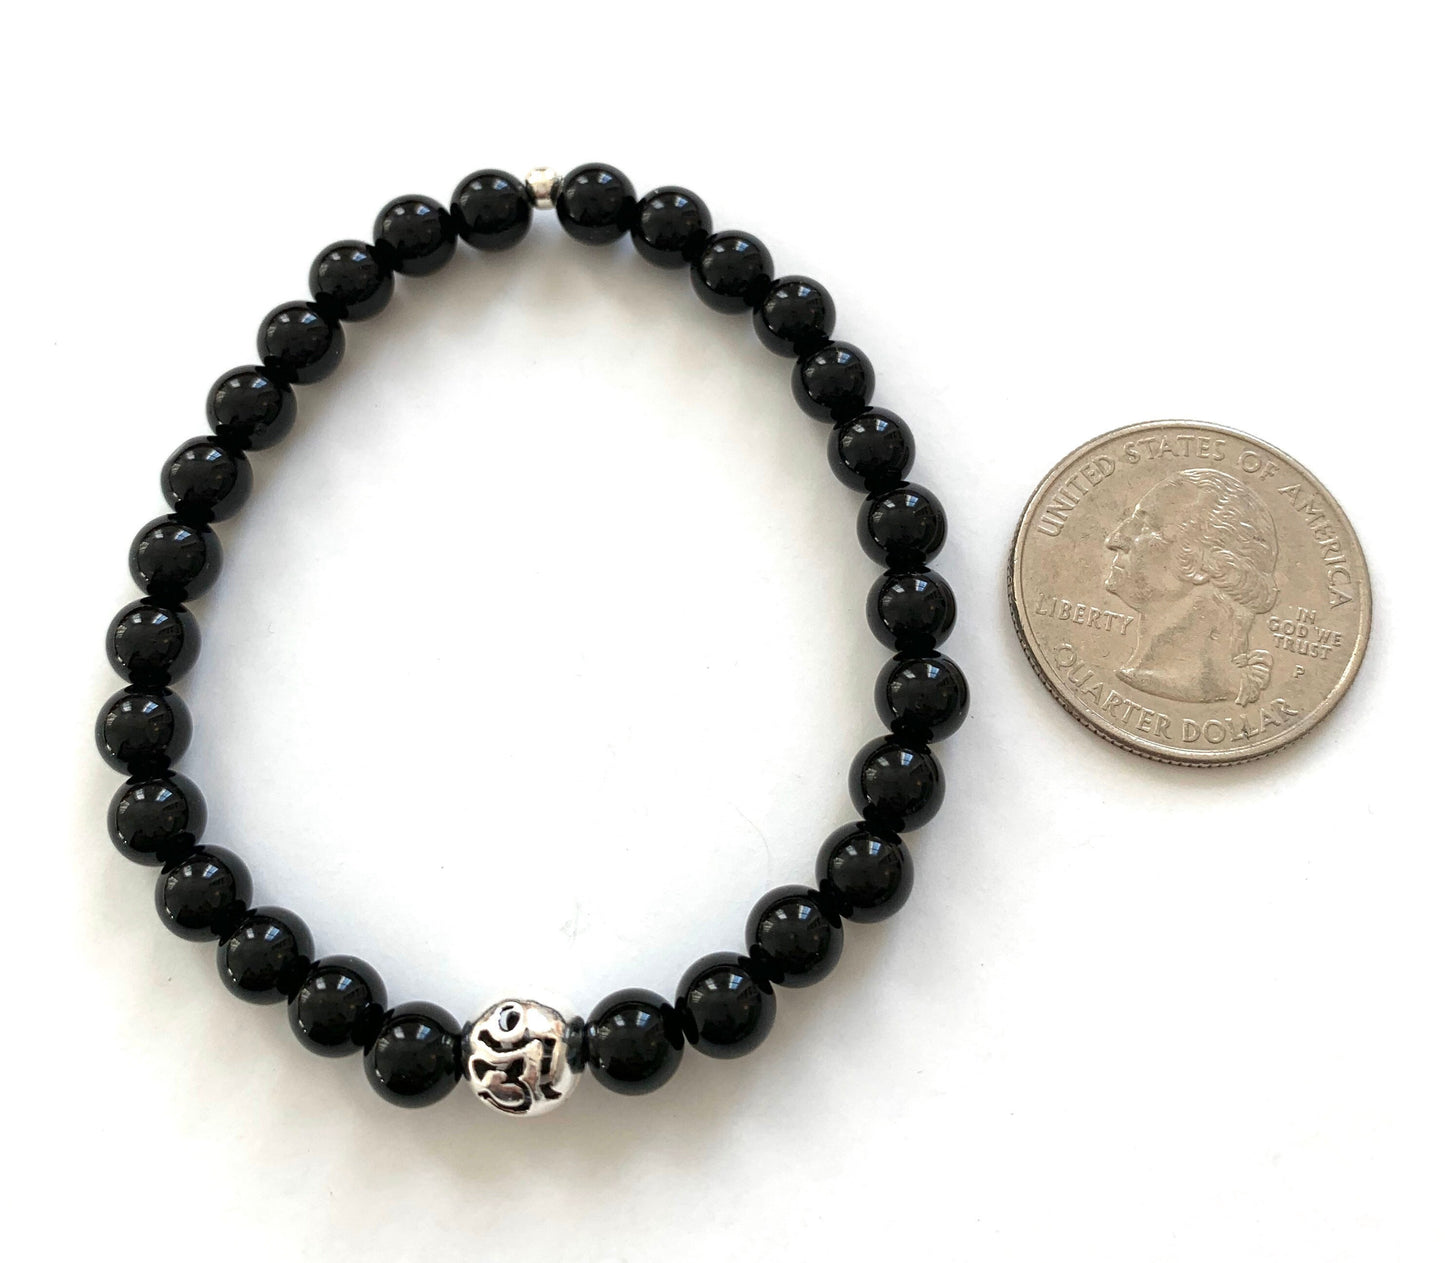 black onyx beaded bracelet with pierced sterling silver Om accent bead  next to a quarter for size comparison